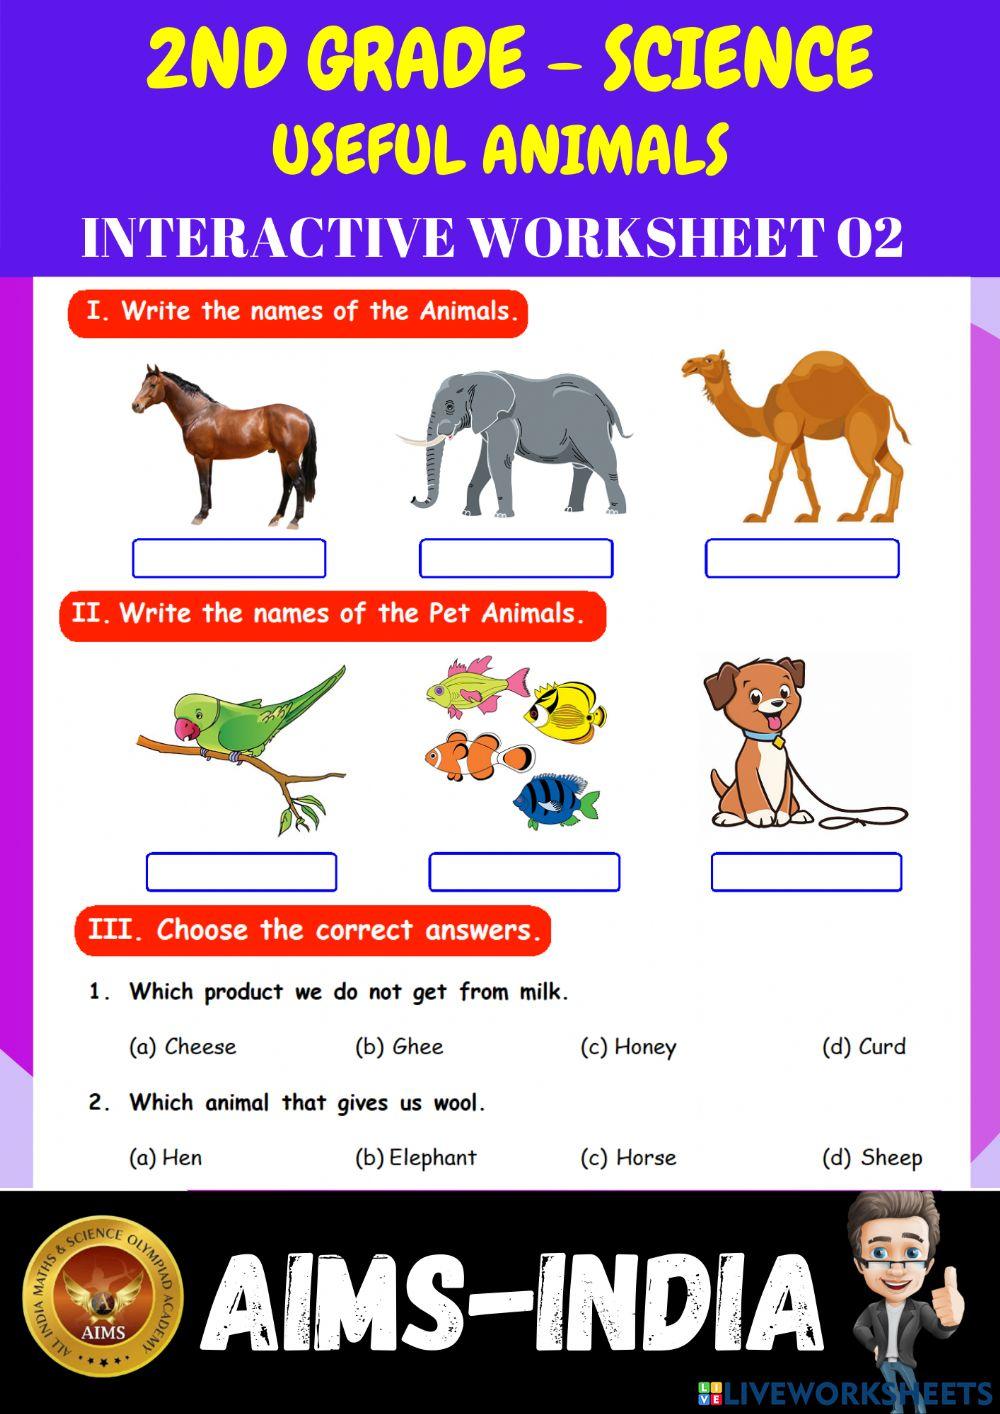 2nd-science-ps02-useful animals